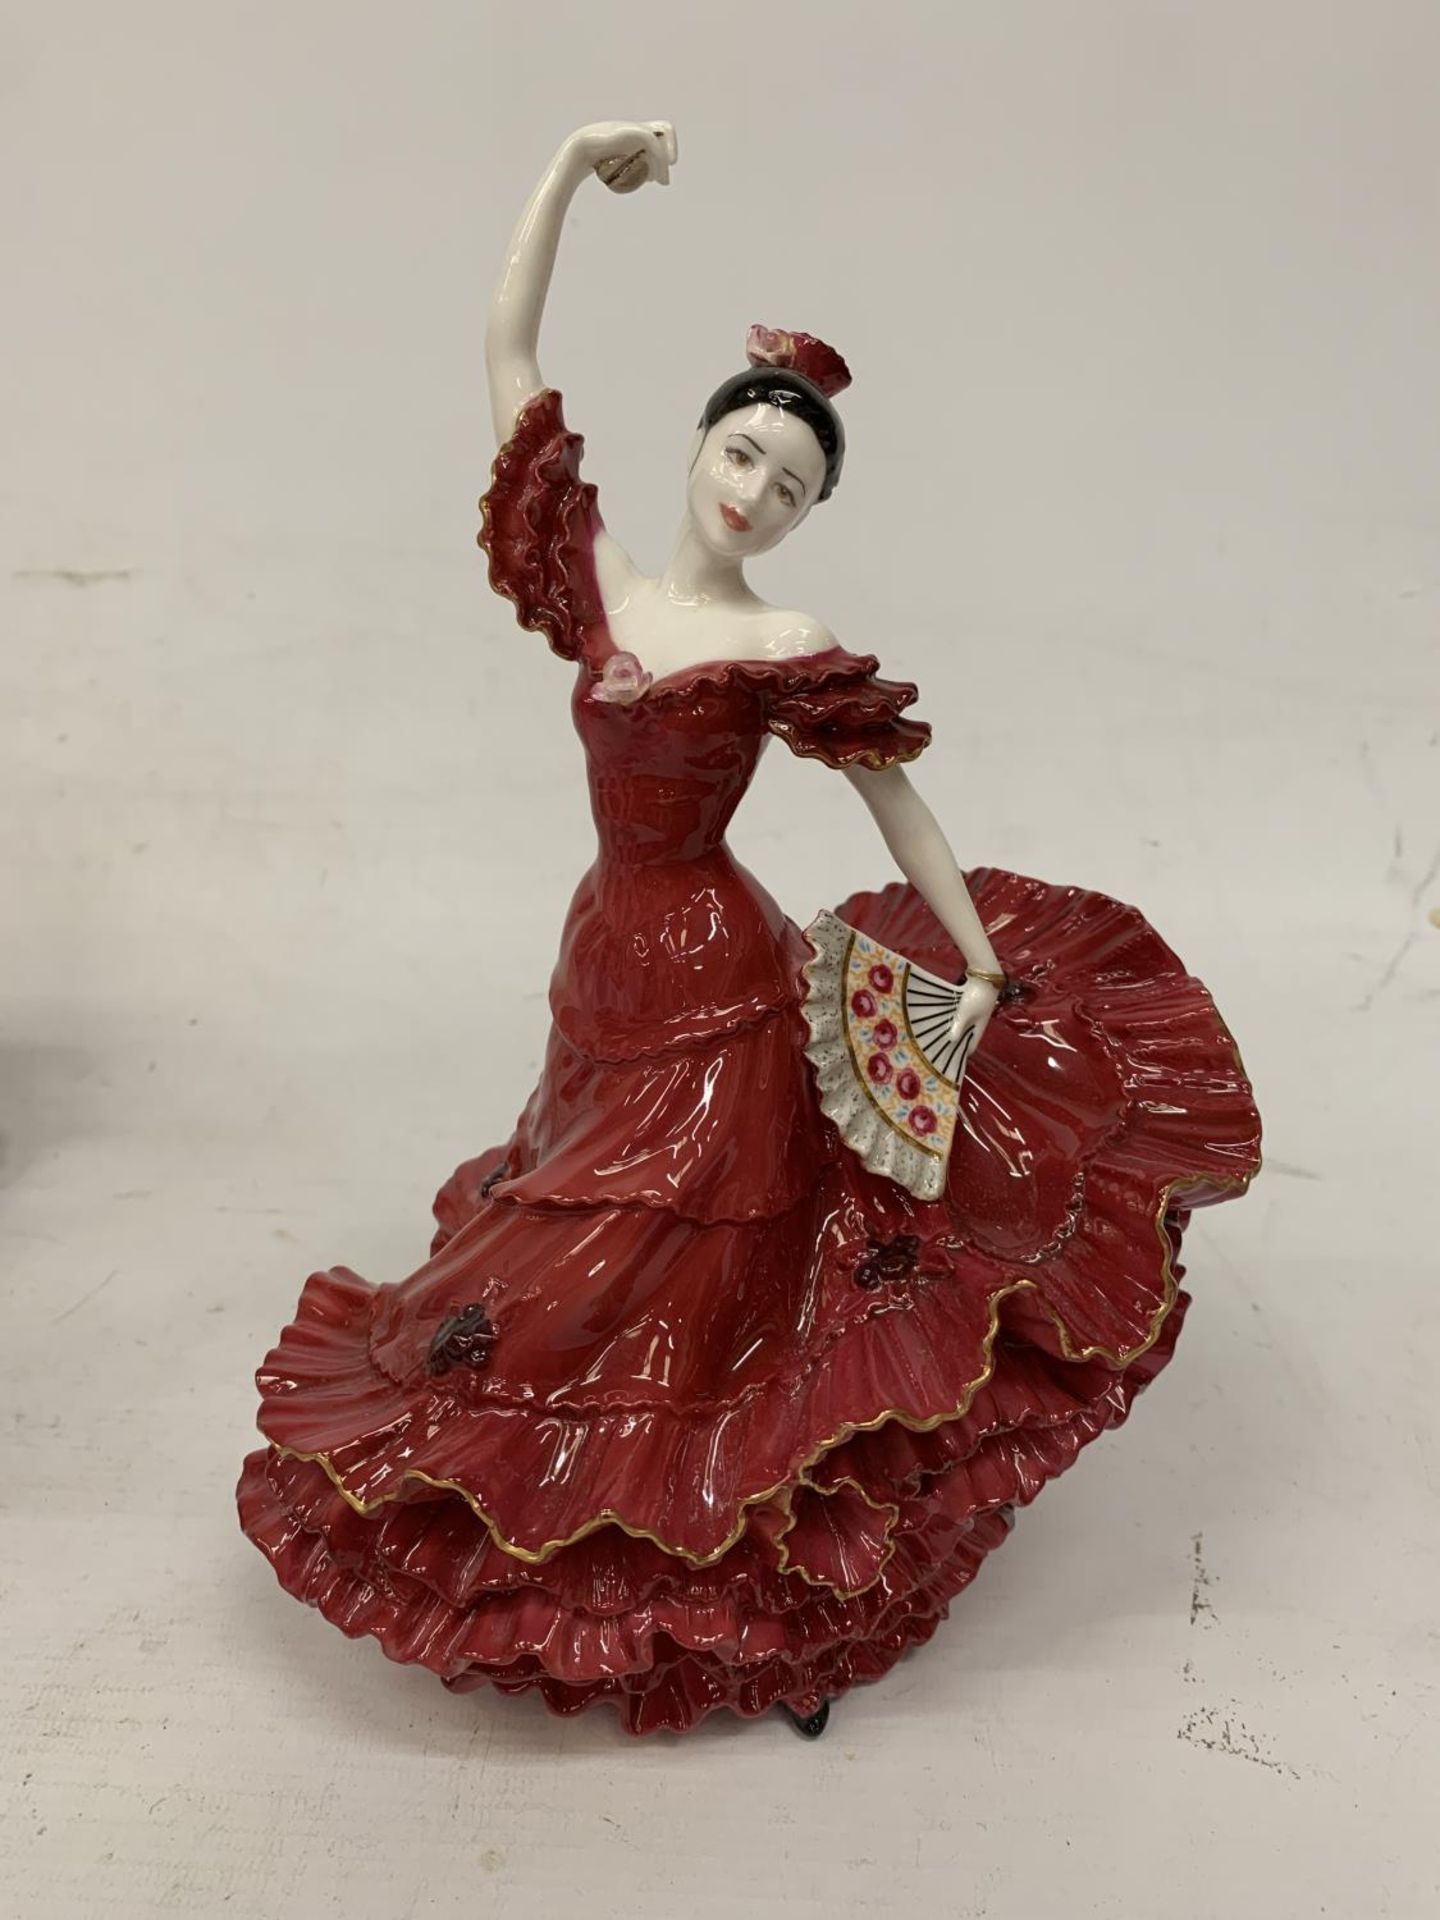 A COALPORT FIGURINE "FLAMENCO" FROM THE COLLECTION A PASSION FOR DANCE ISSUED IN A LIMITED EDITION